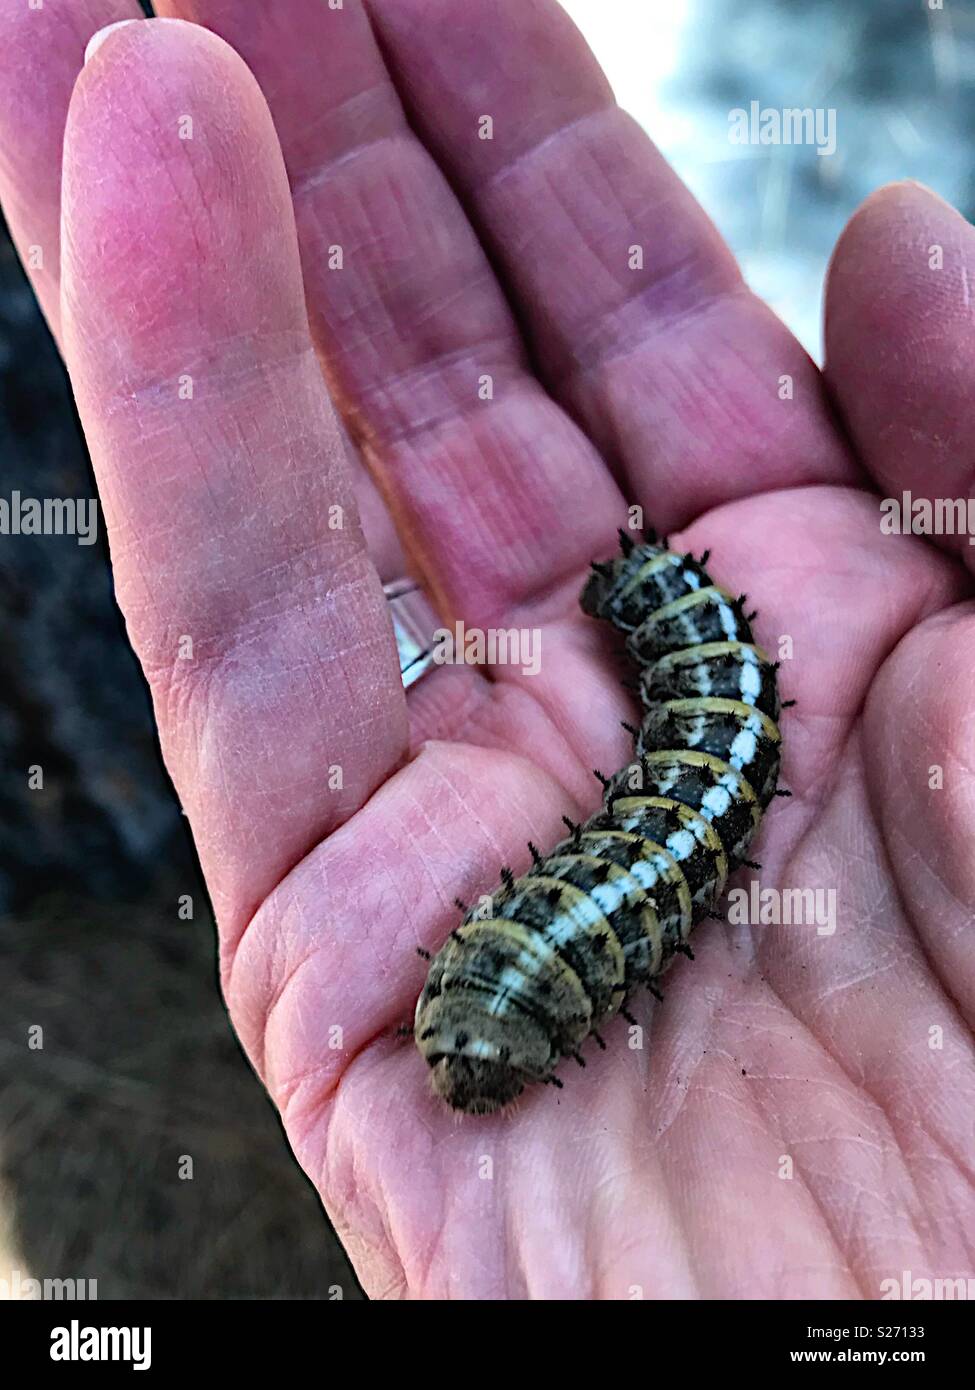 Large caterpillar in a man’s hand Stock Photo